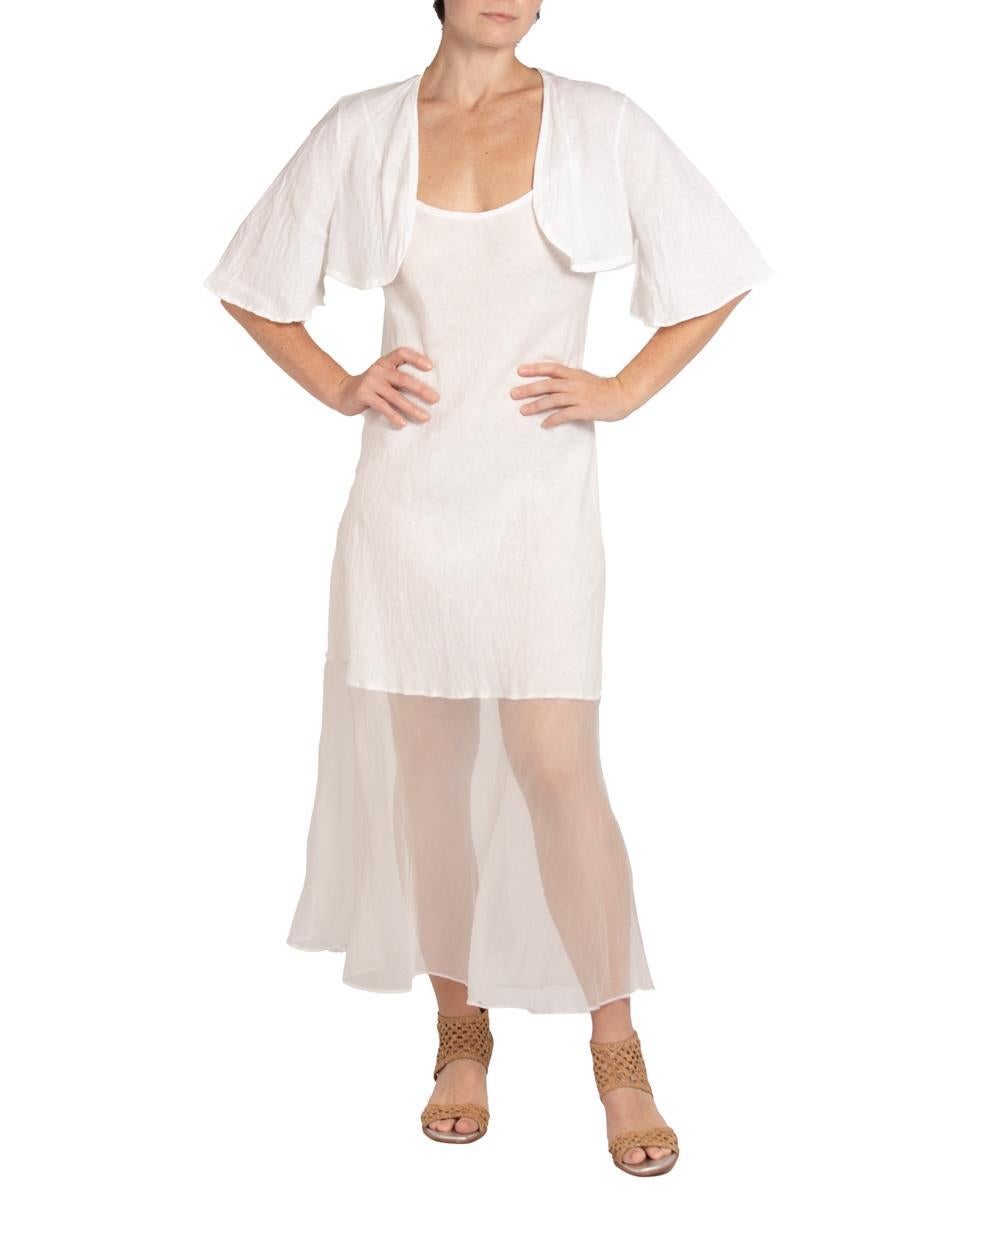 MORPHEW COLLECTION White Linen Bias Cut Dress With Jacket
MORPHEW COLLECTION is made entirely by hand in our NYC Ateliér of rare antique materials sourced from around the globe. Our sustainable vintage materials represent over a century of design,